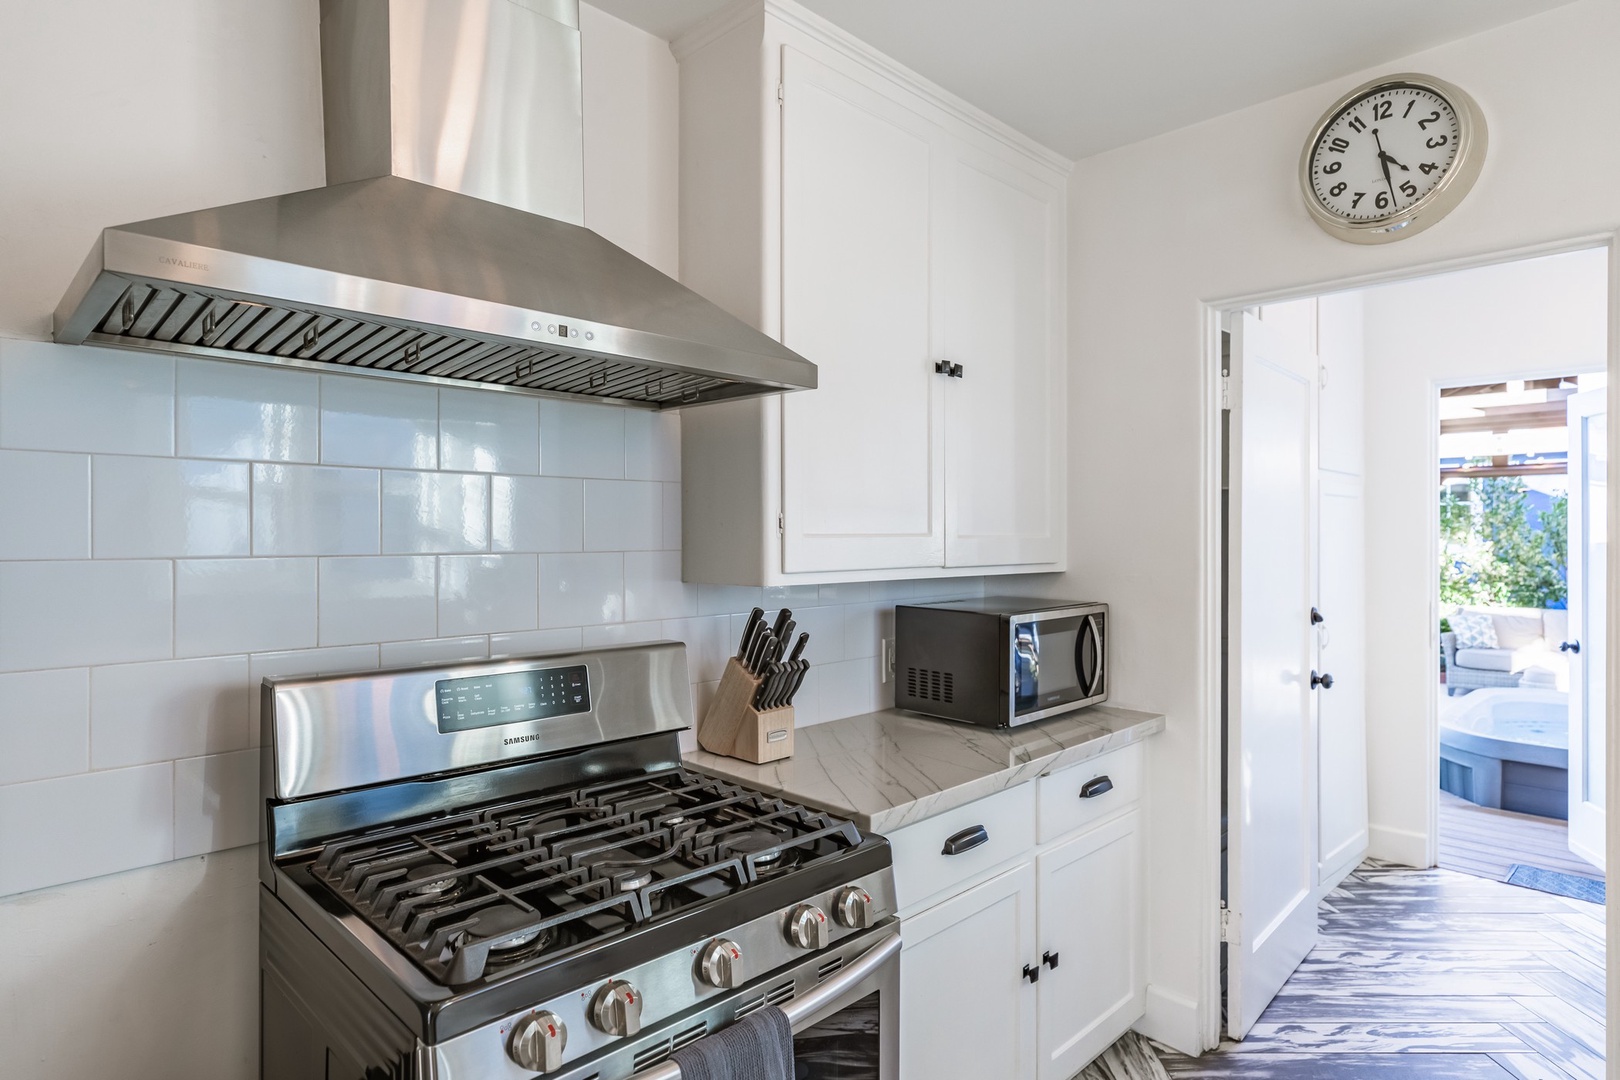 Stainless appliances with gas stove